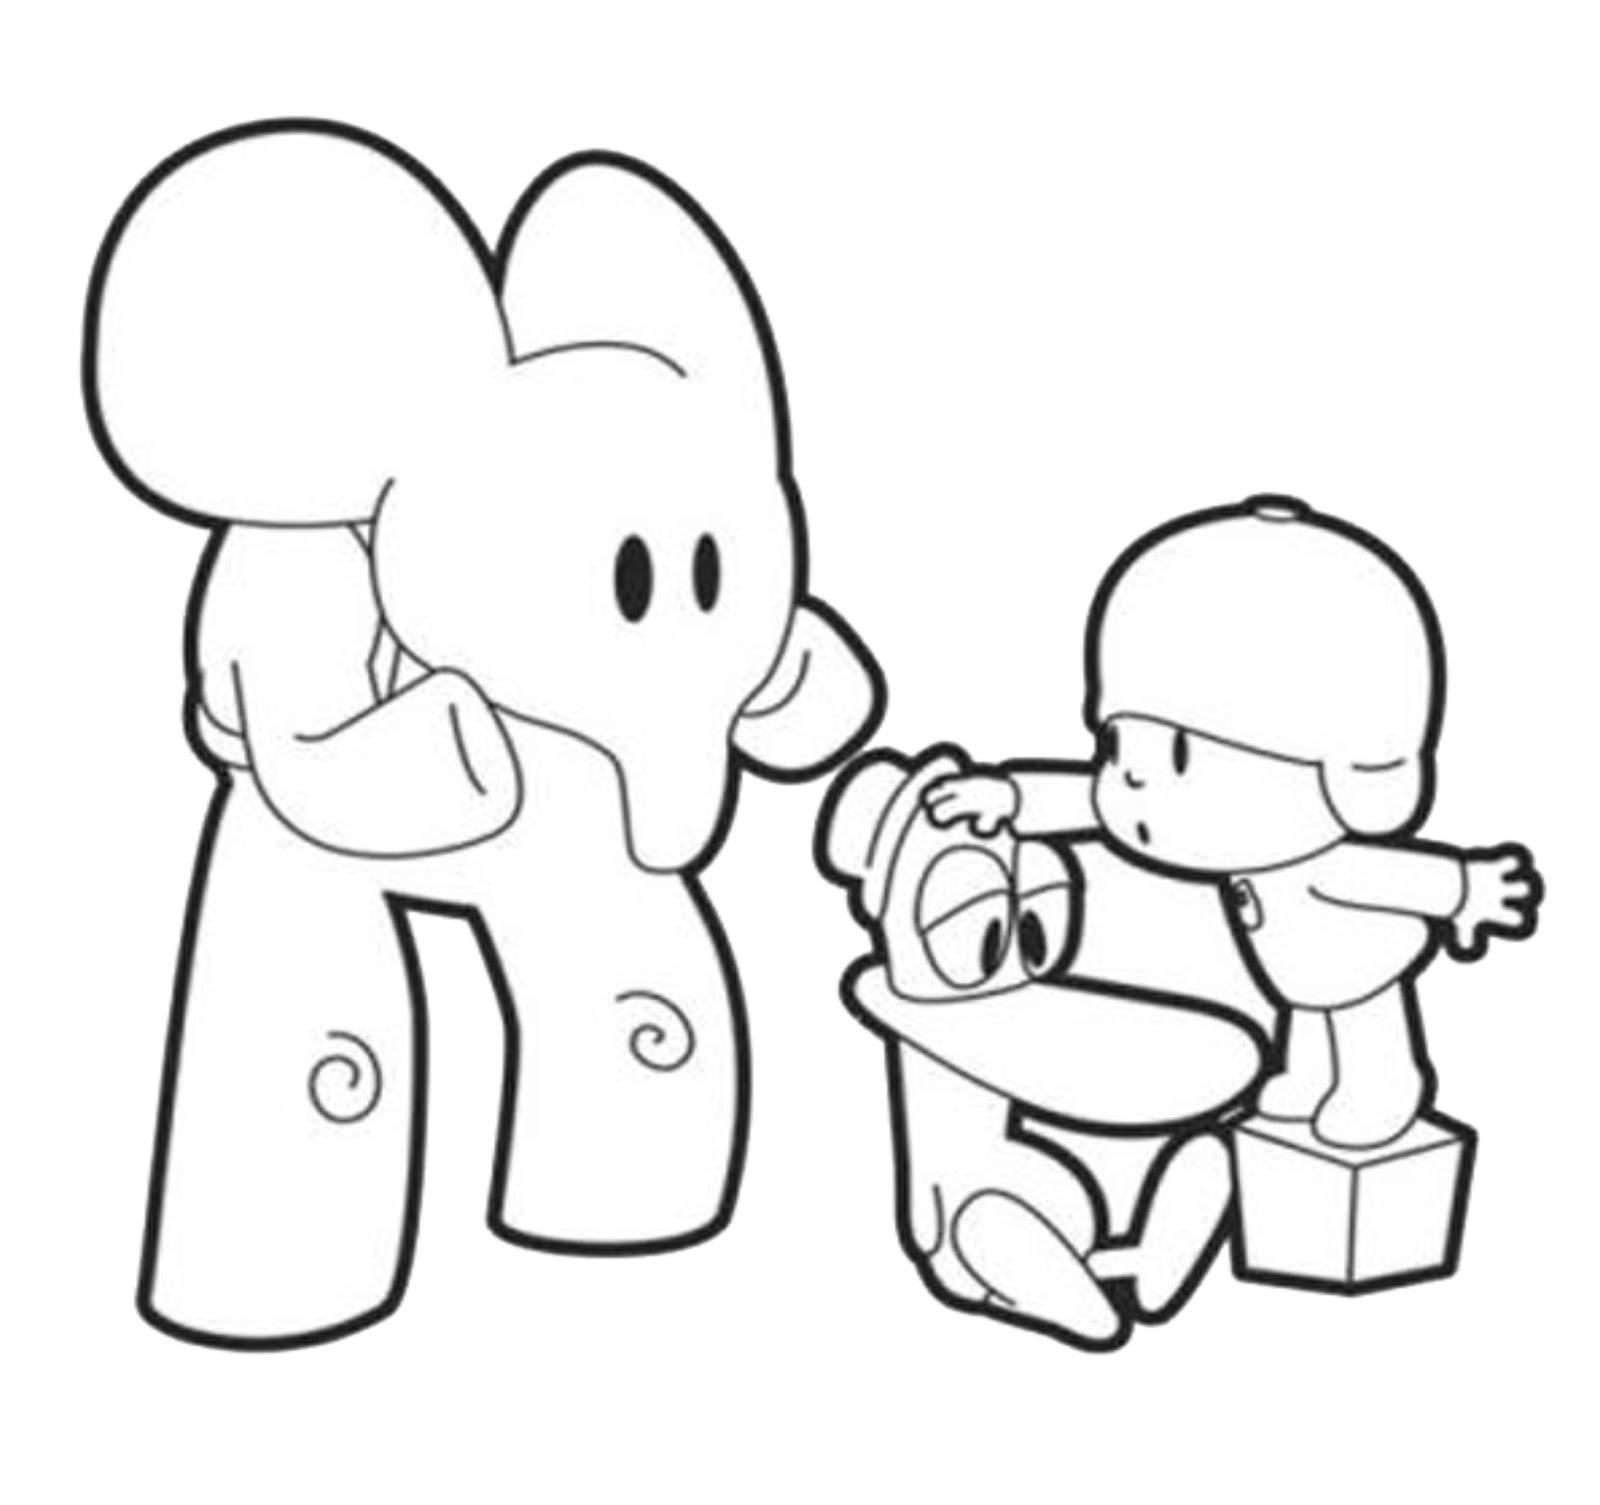 Pocoyo Coloring Pages Free Printable Coloring Pages